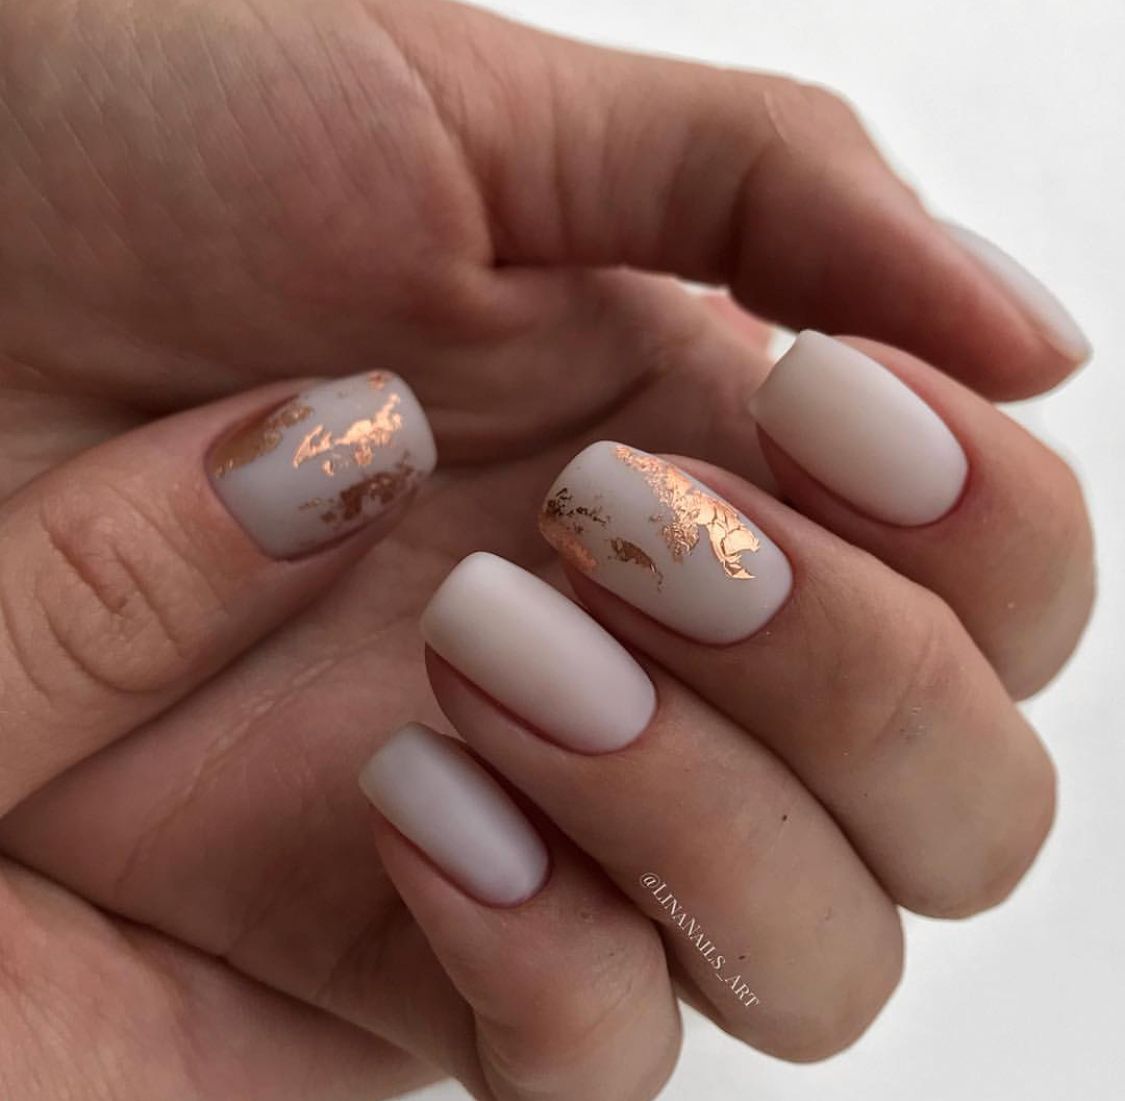 Helpful Tips For Rocking Your Nude Nails